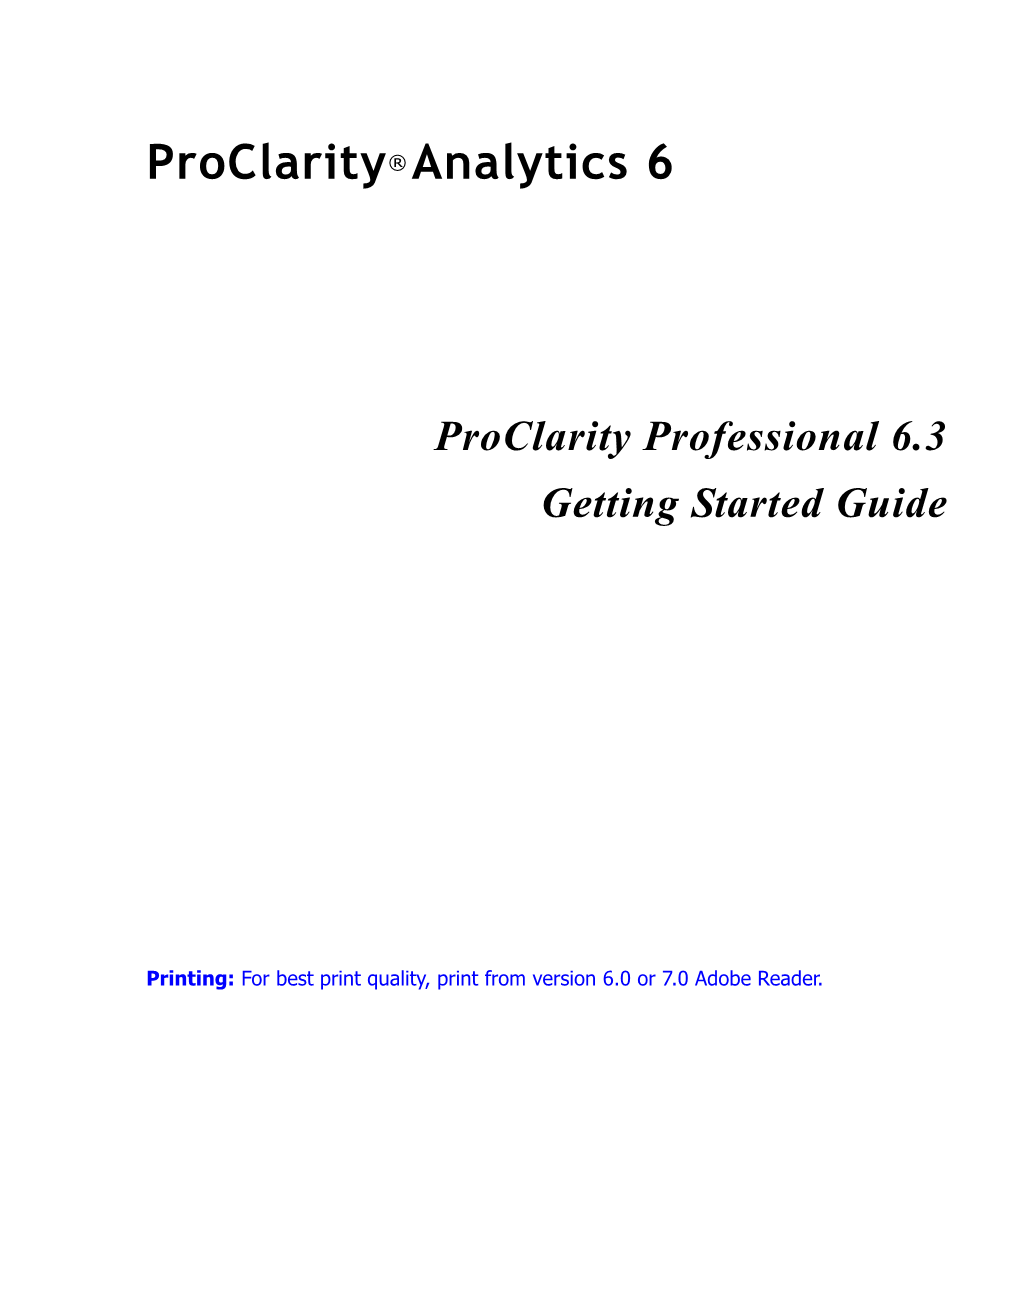 Proclarity Professional Getting Started Guide